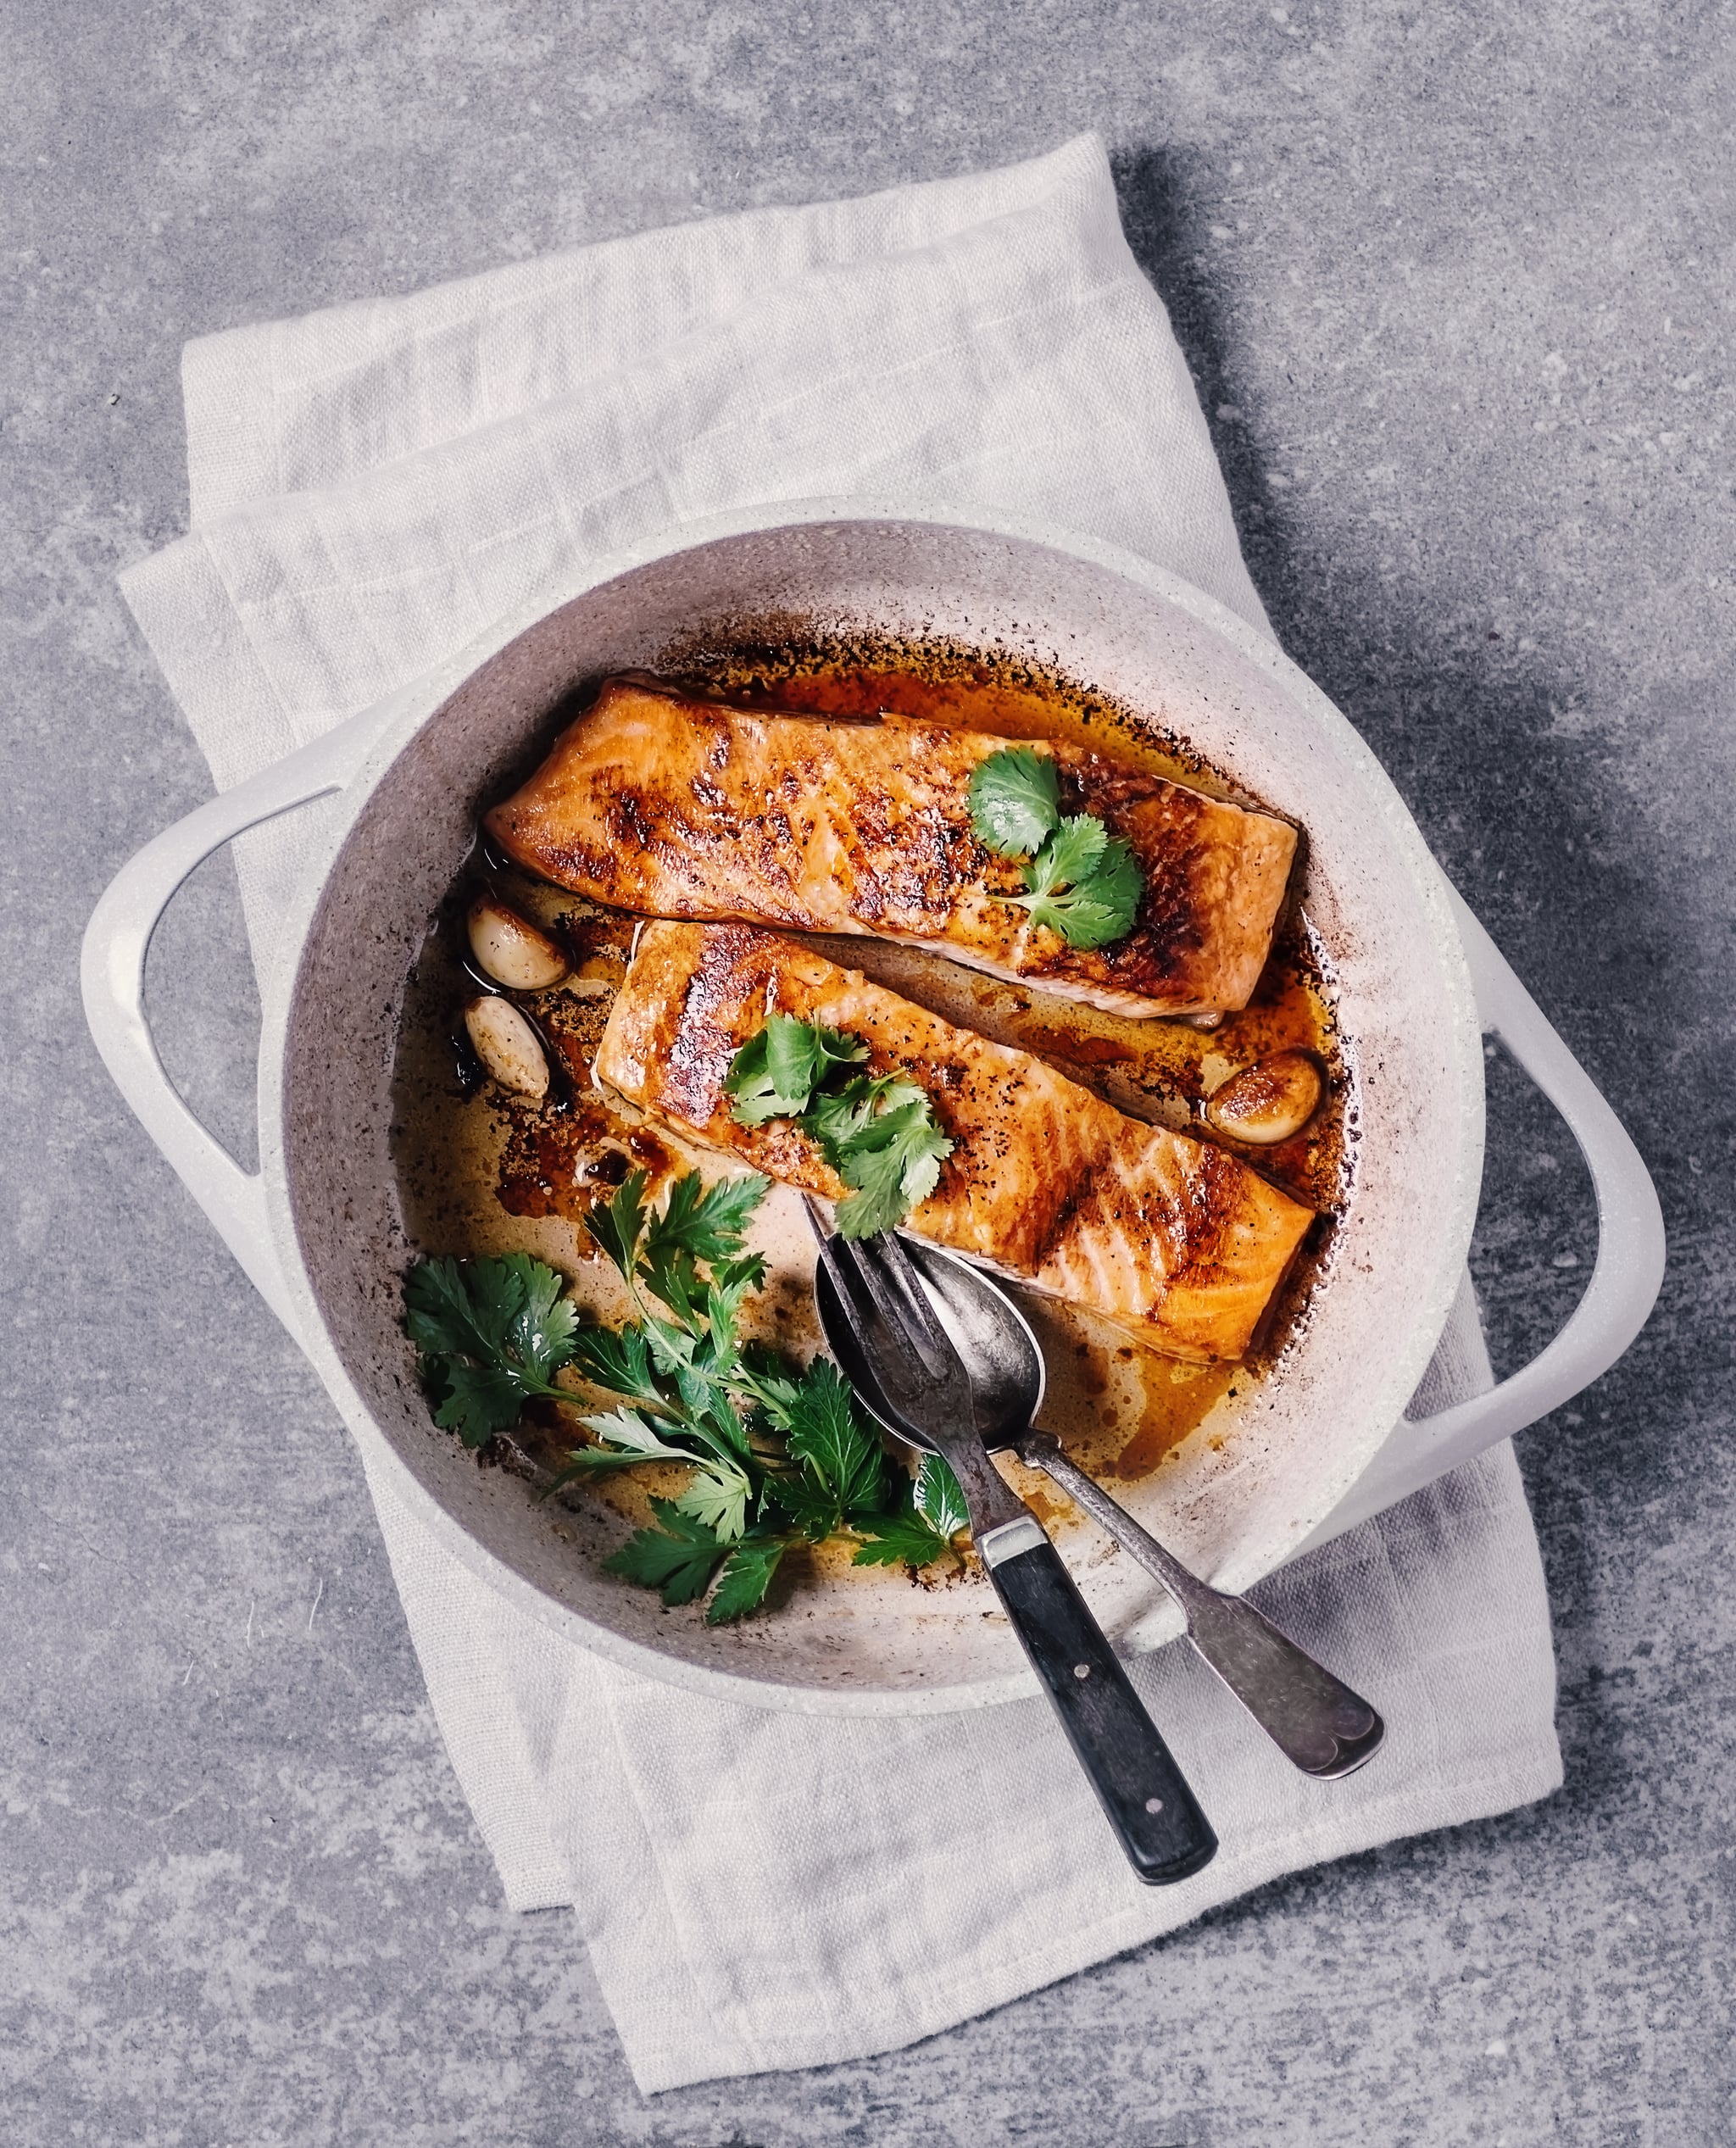 Seared salmon in a cooking pan on gray background